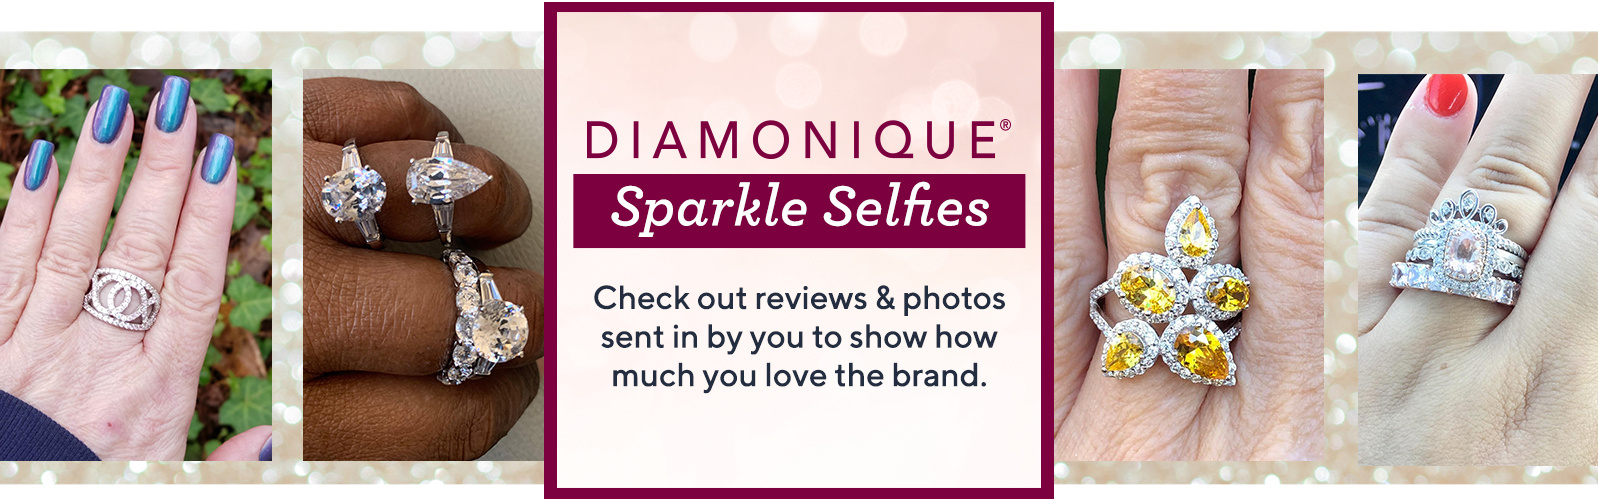  Sparkle Selfies - Check out reviews & photos sent in by you to show how much you love the brand.